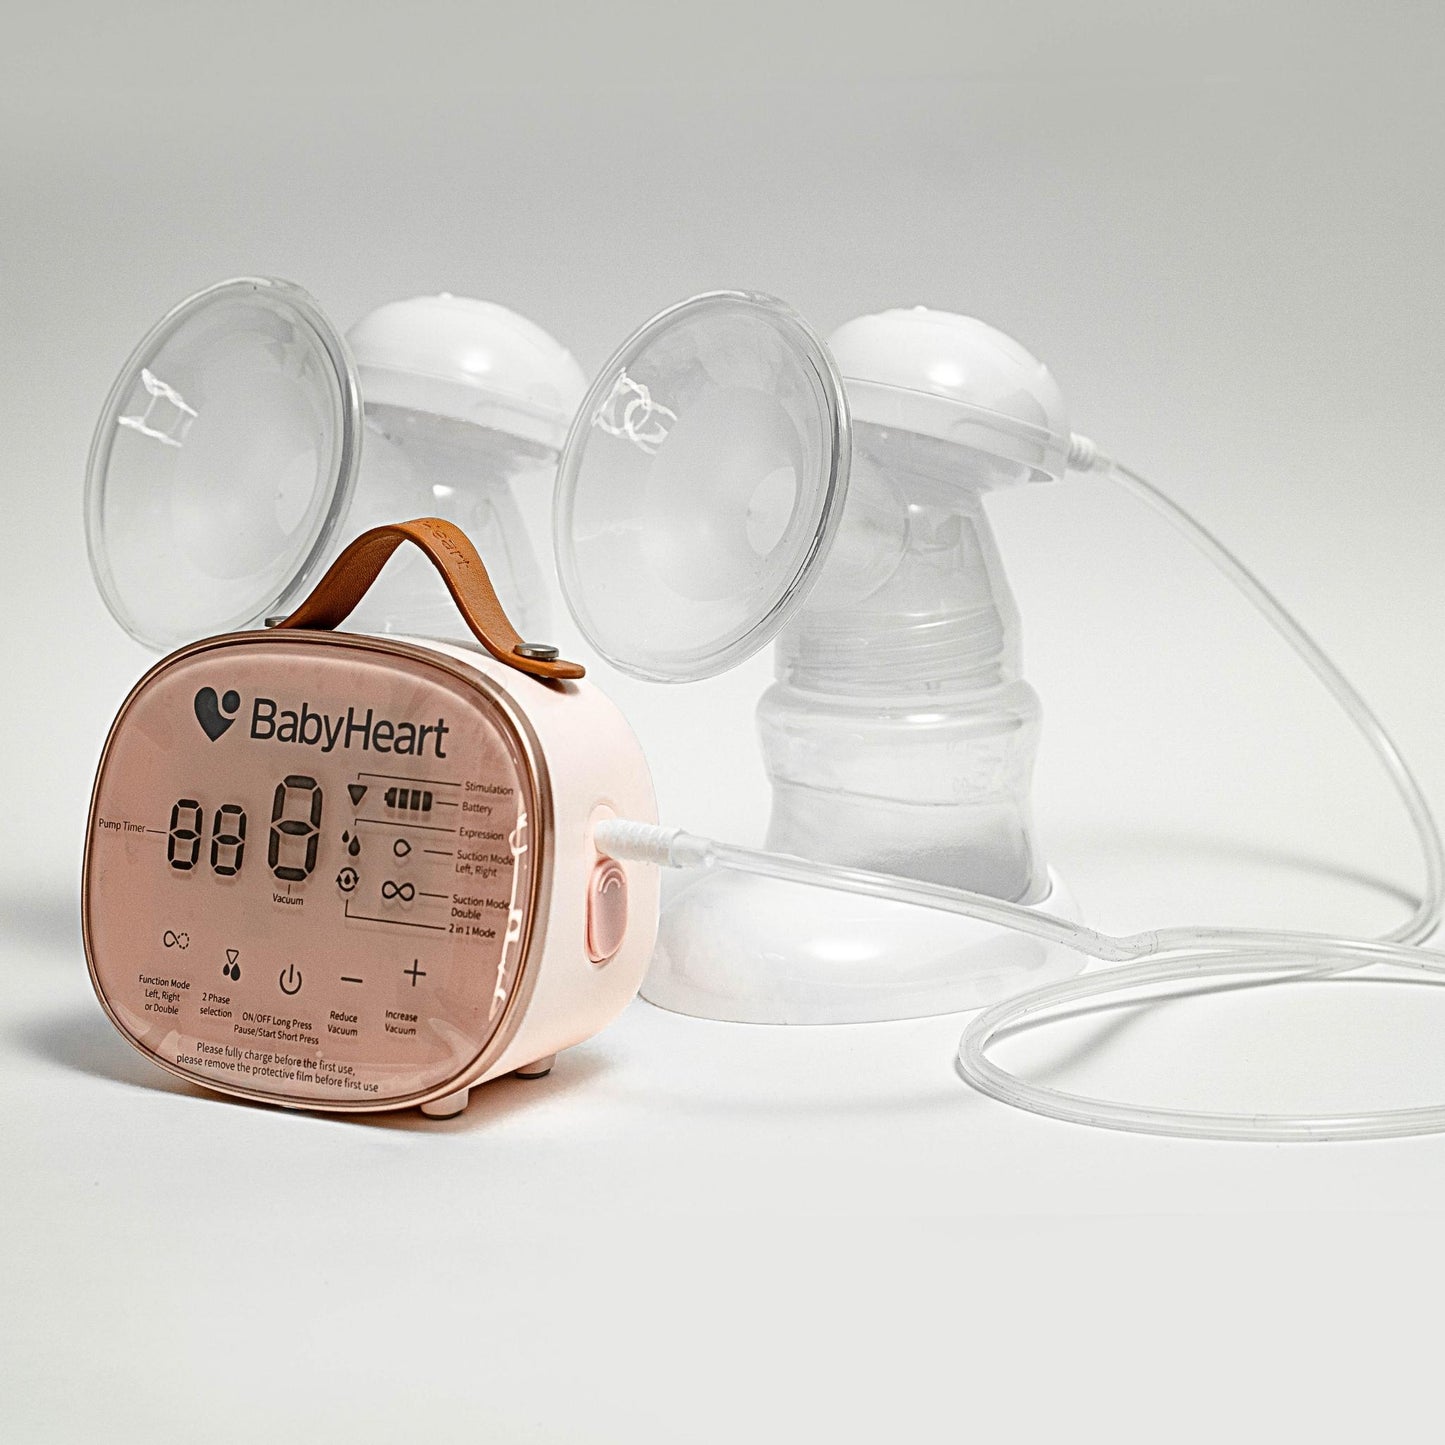 BabyHeart’s double electric breast pump unit